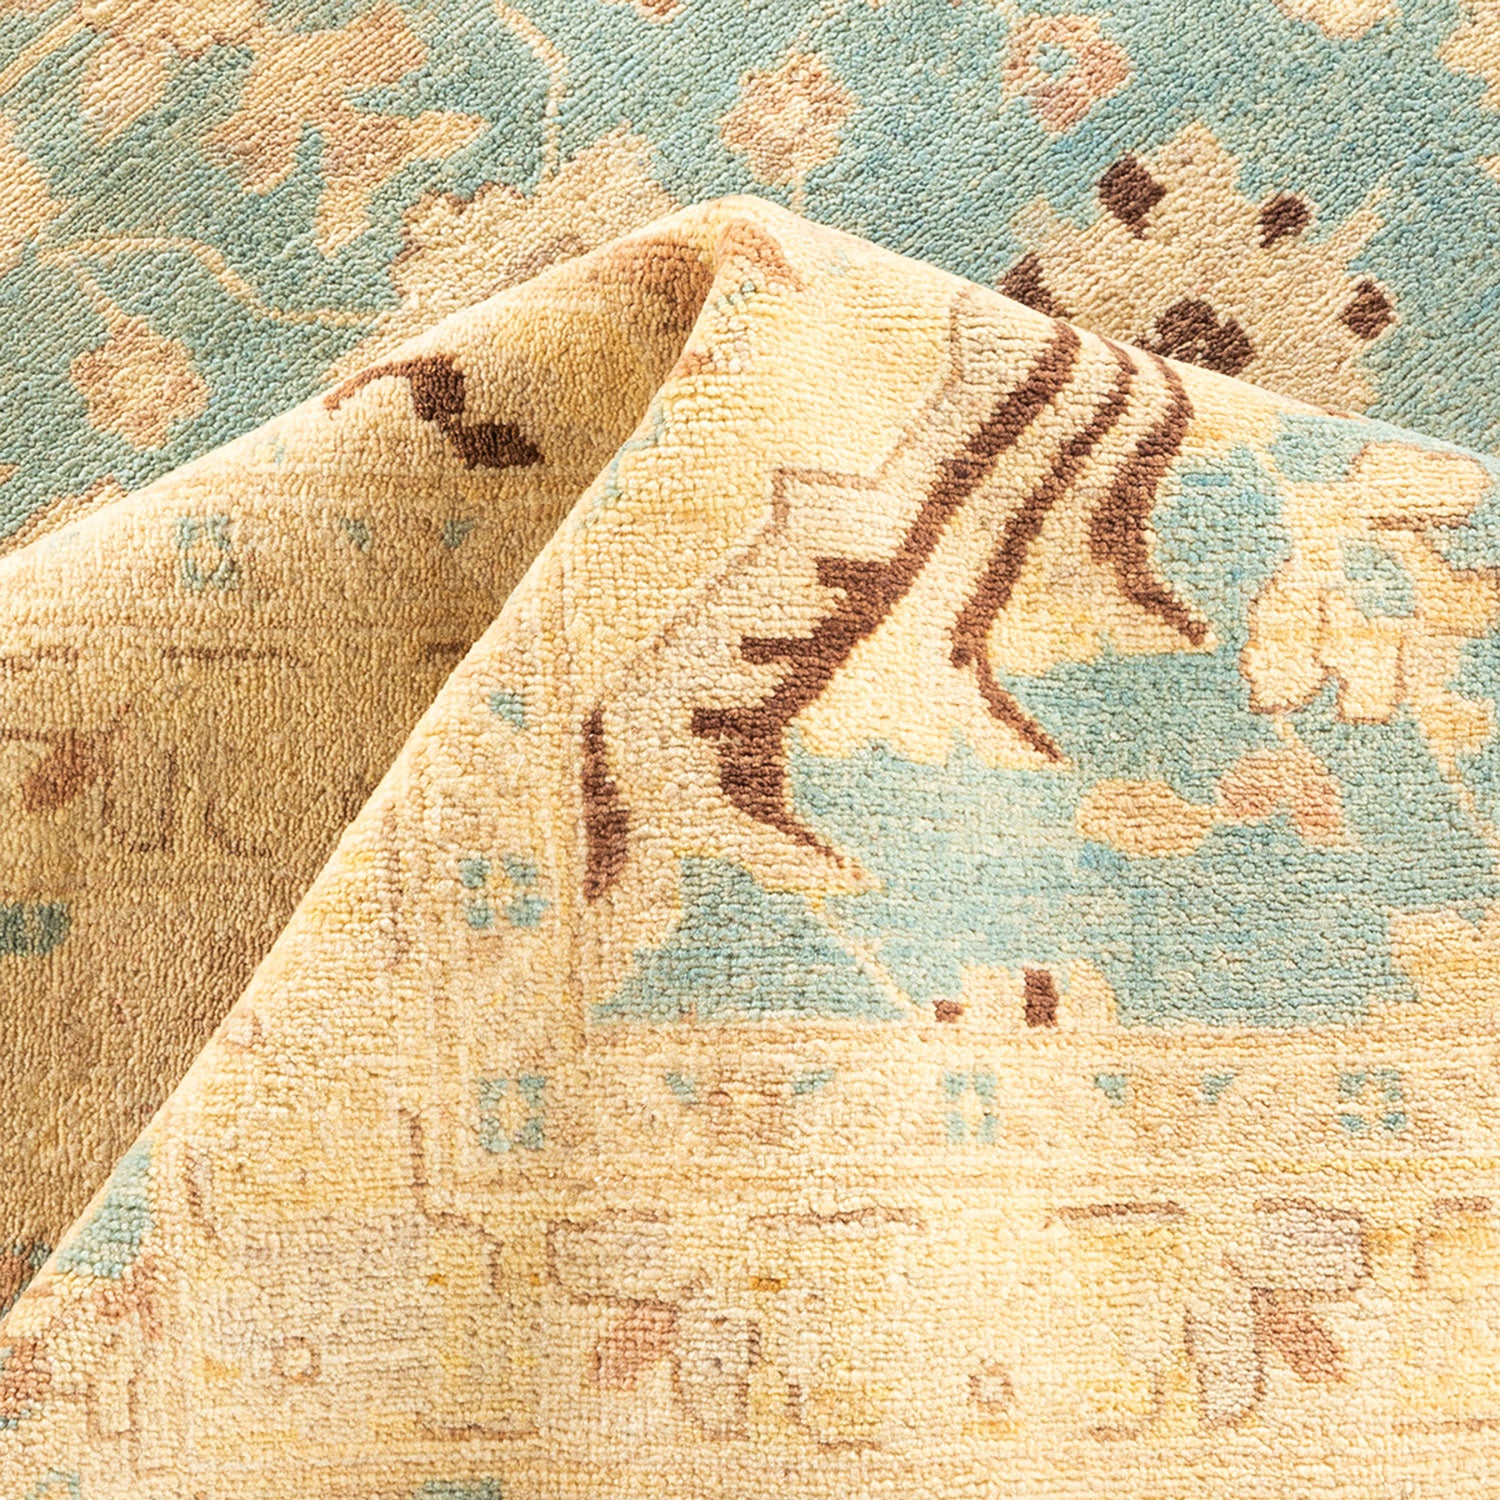 Close-up of a plush, well-crafted carpet with ornate patterns.